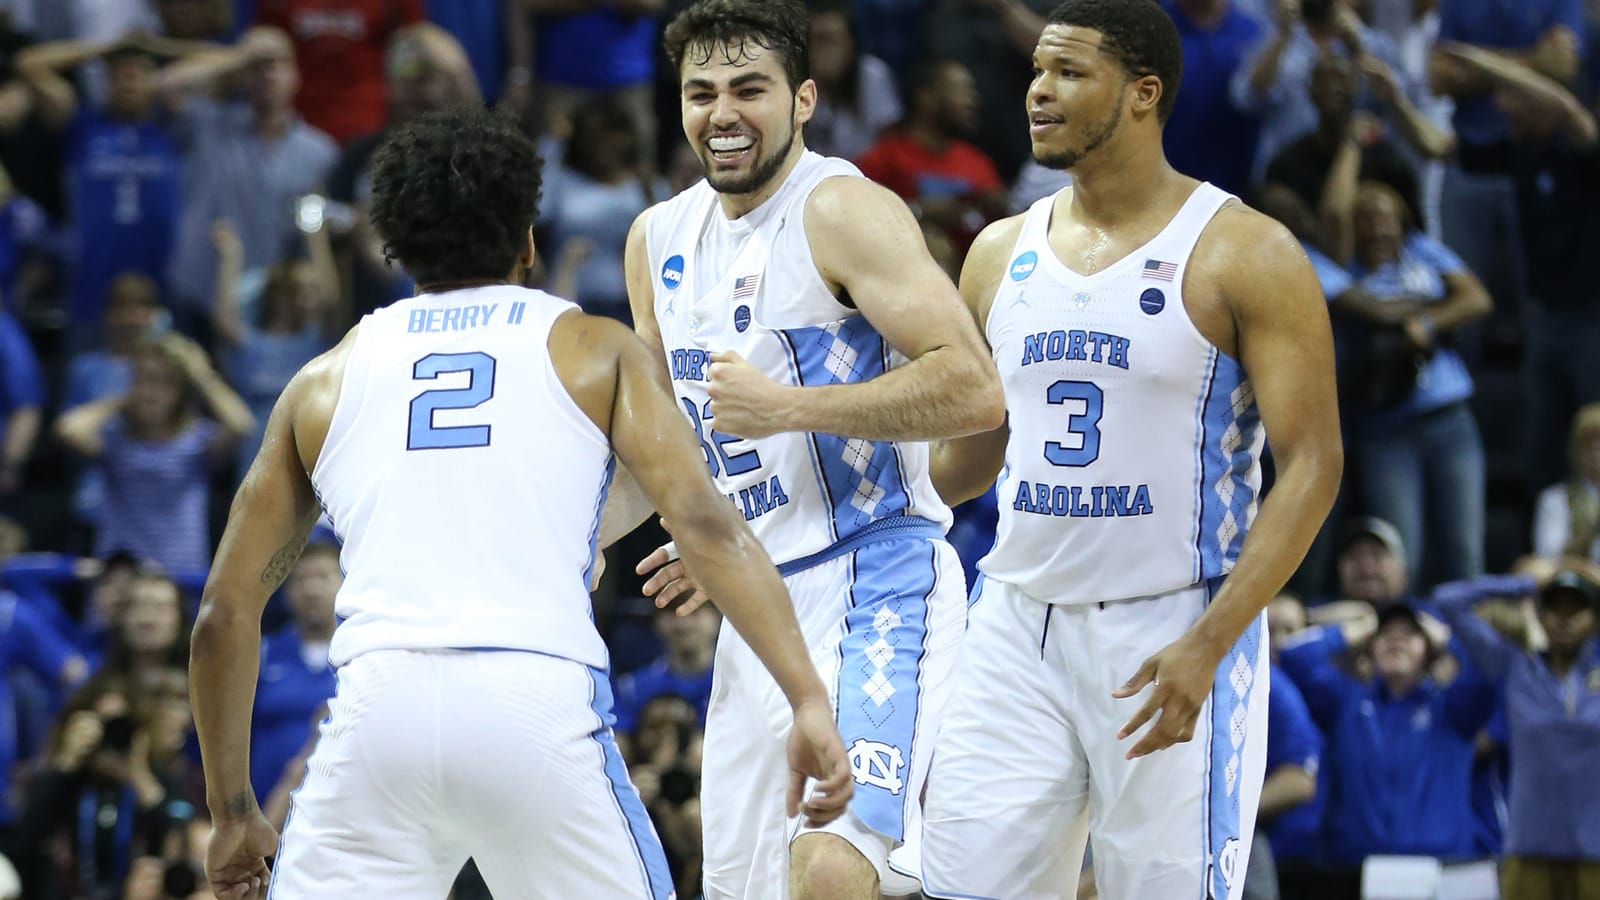 Five best moments from the season for each Final Four team